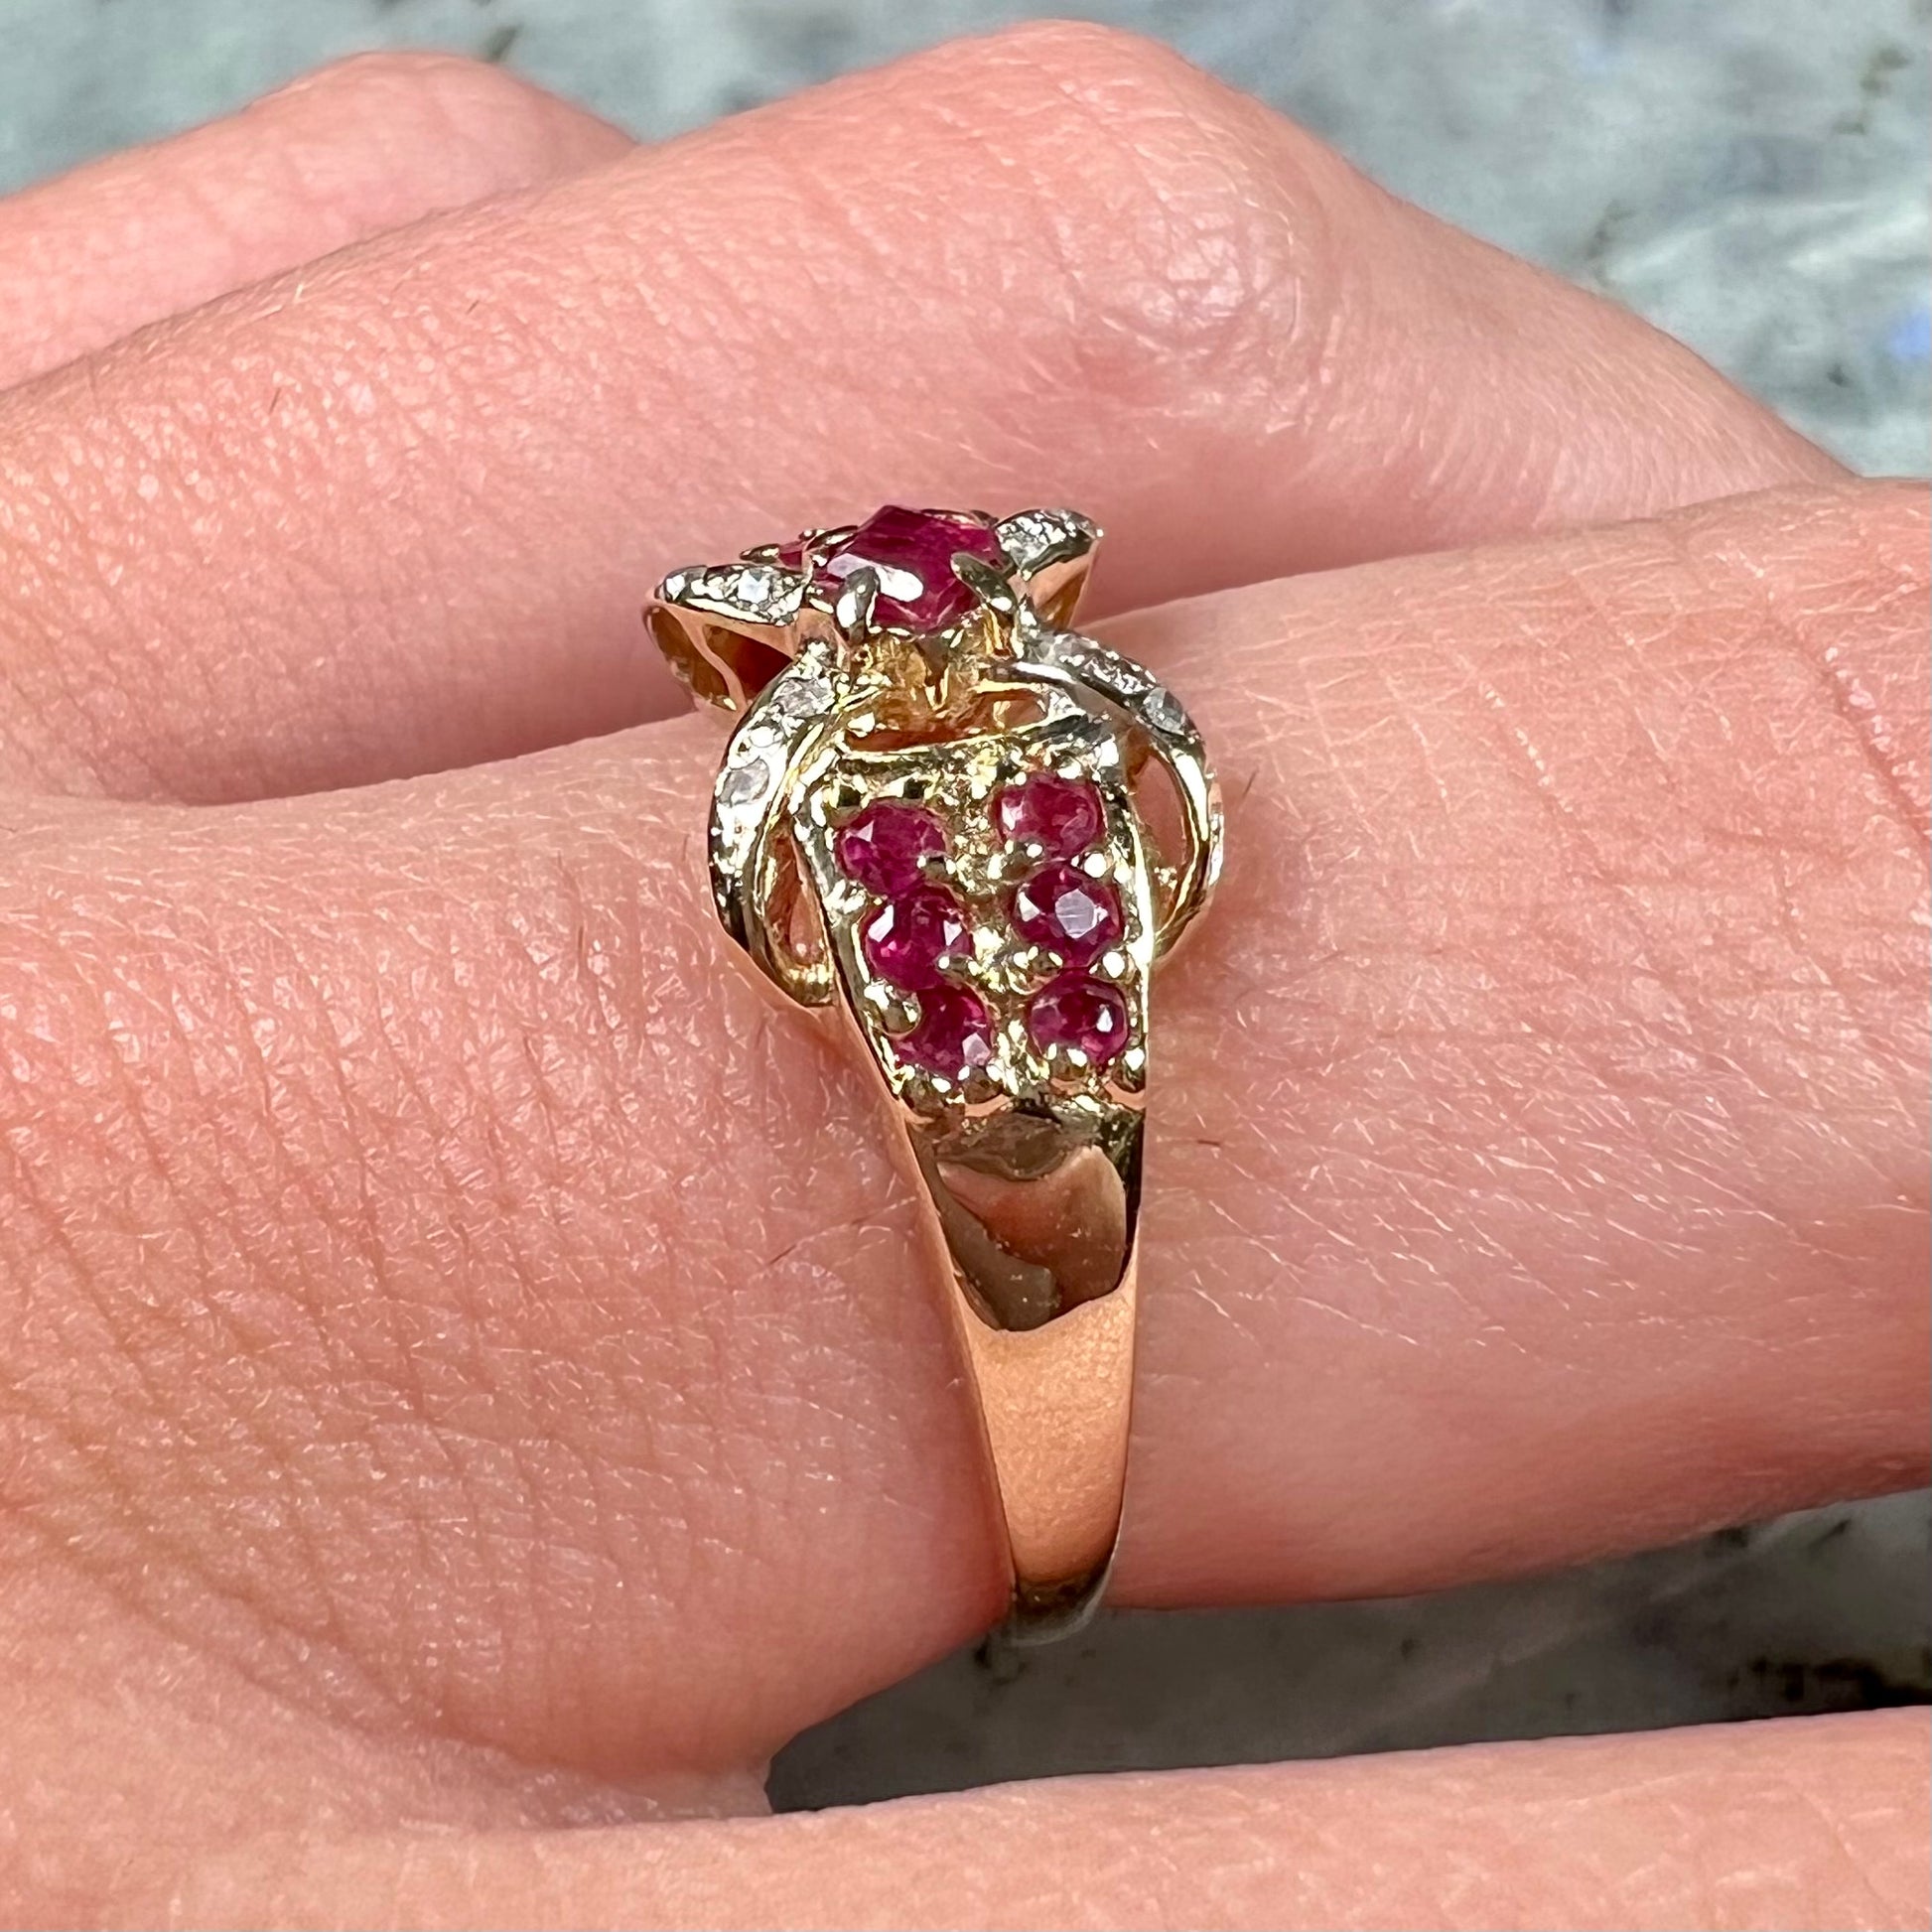 A yellow gold princess cut ruby ring set with round ruby and diamond accents.